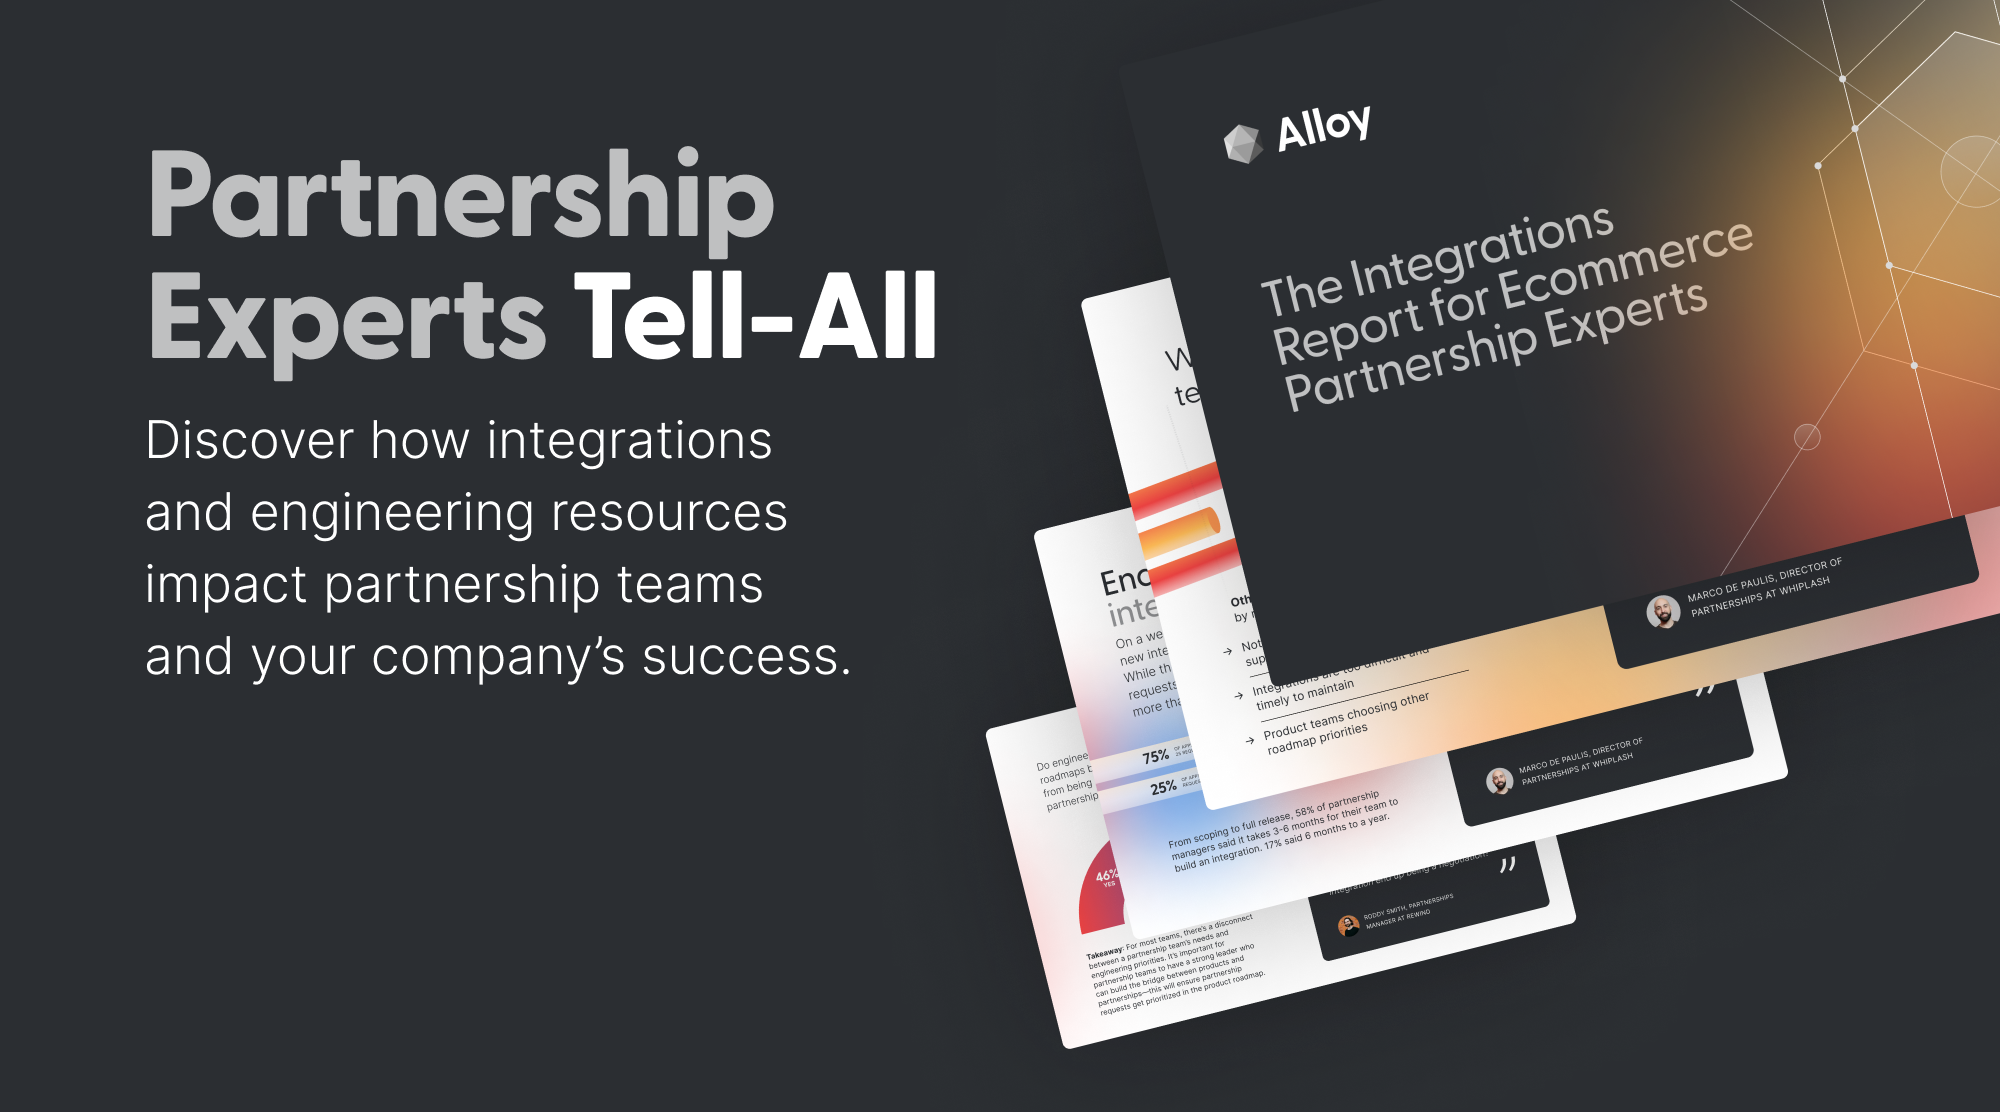 Partnership experts tell-all in th Alloy integrations report